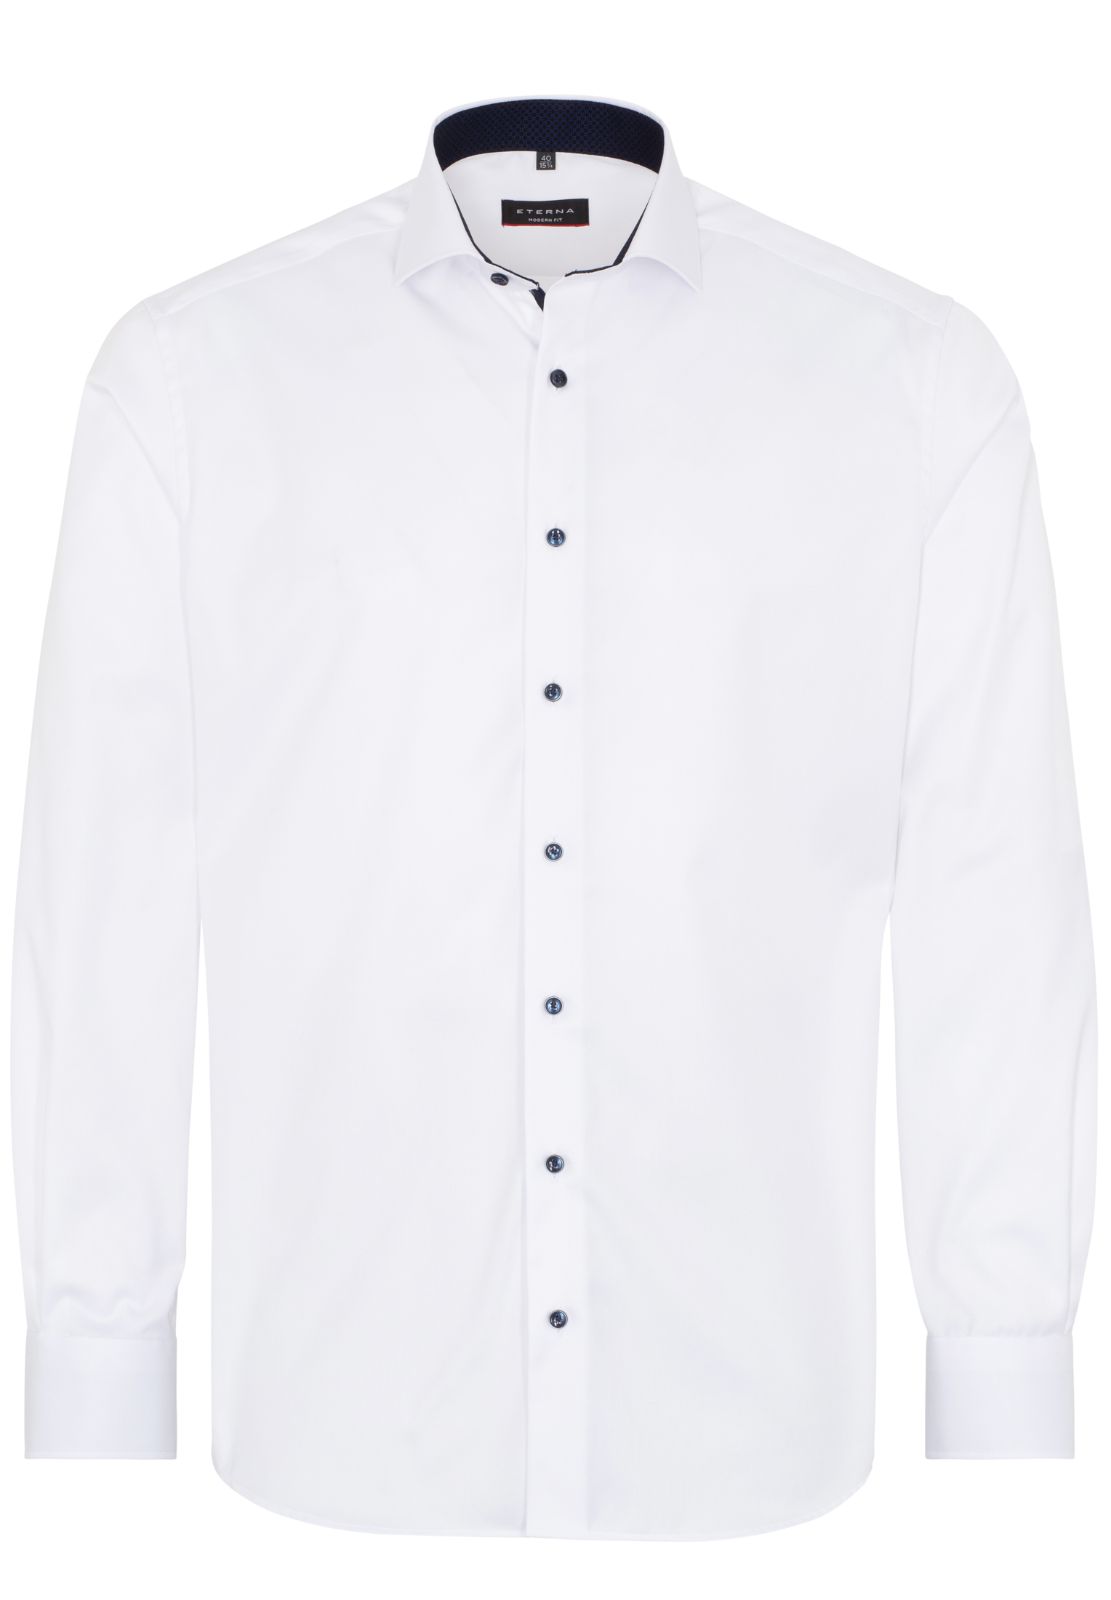 Modern Fit cover shirt with contrast button